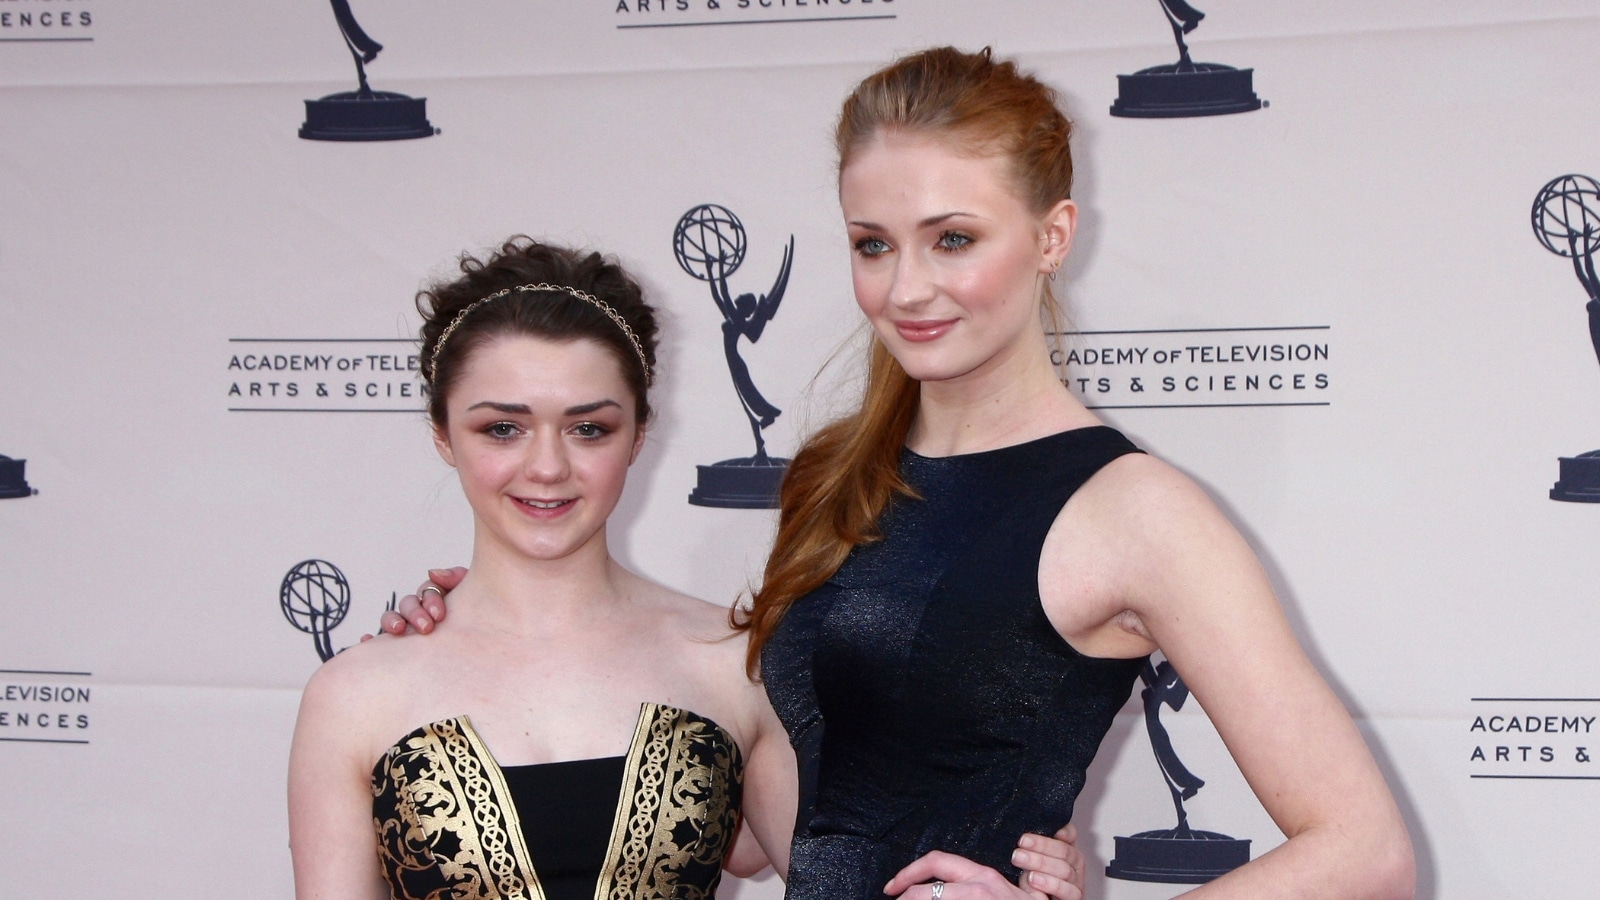 LOS ANGELES - MAR 19: Maisie Williams, Sophie Turner arrive at "An Evening with The Game of Thrones" hosted by ATAS at the Chinese Theater on March 19, 2013 in Los Angeles, CA